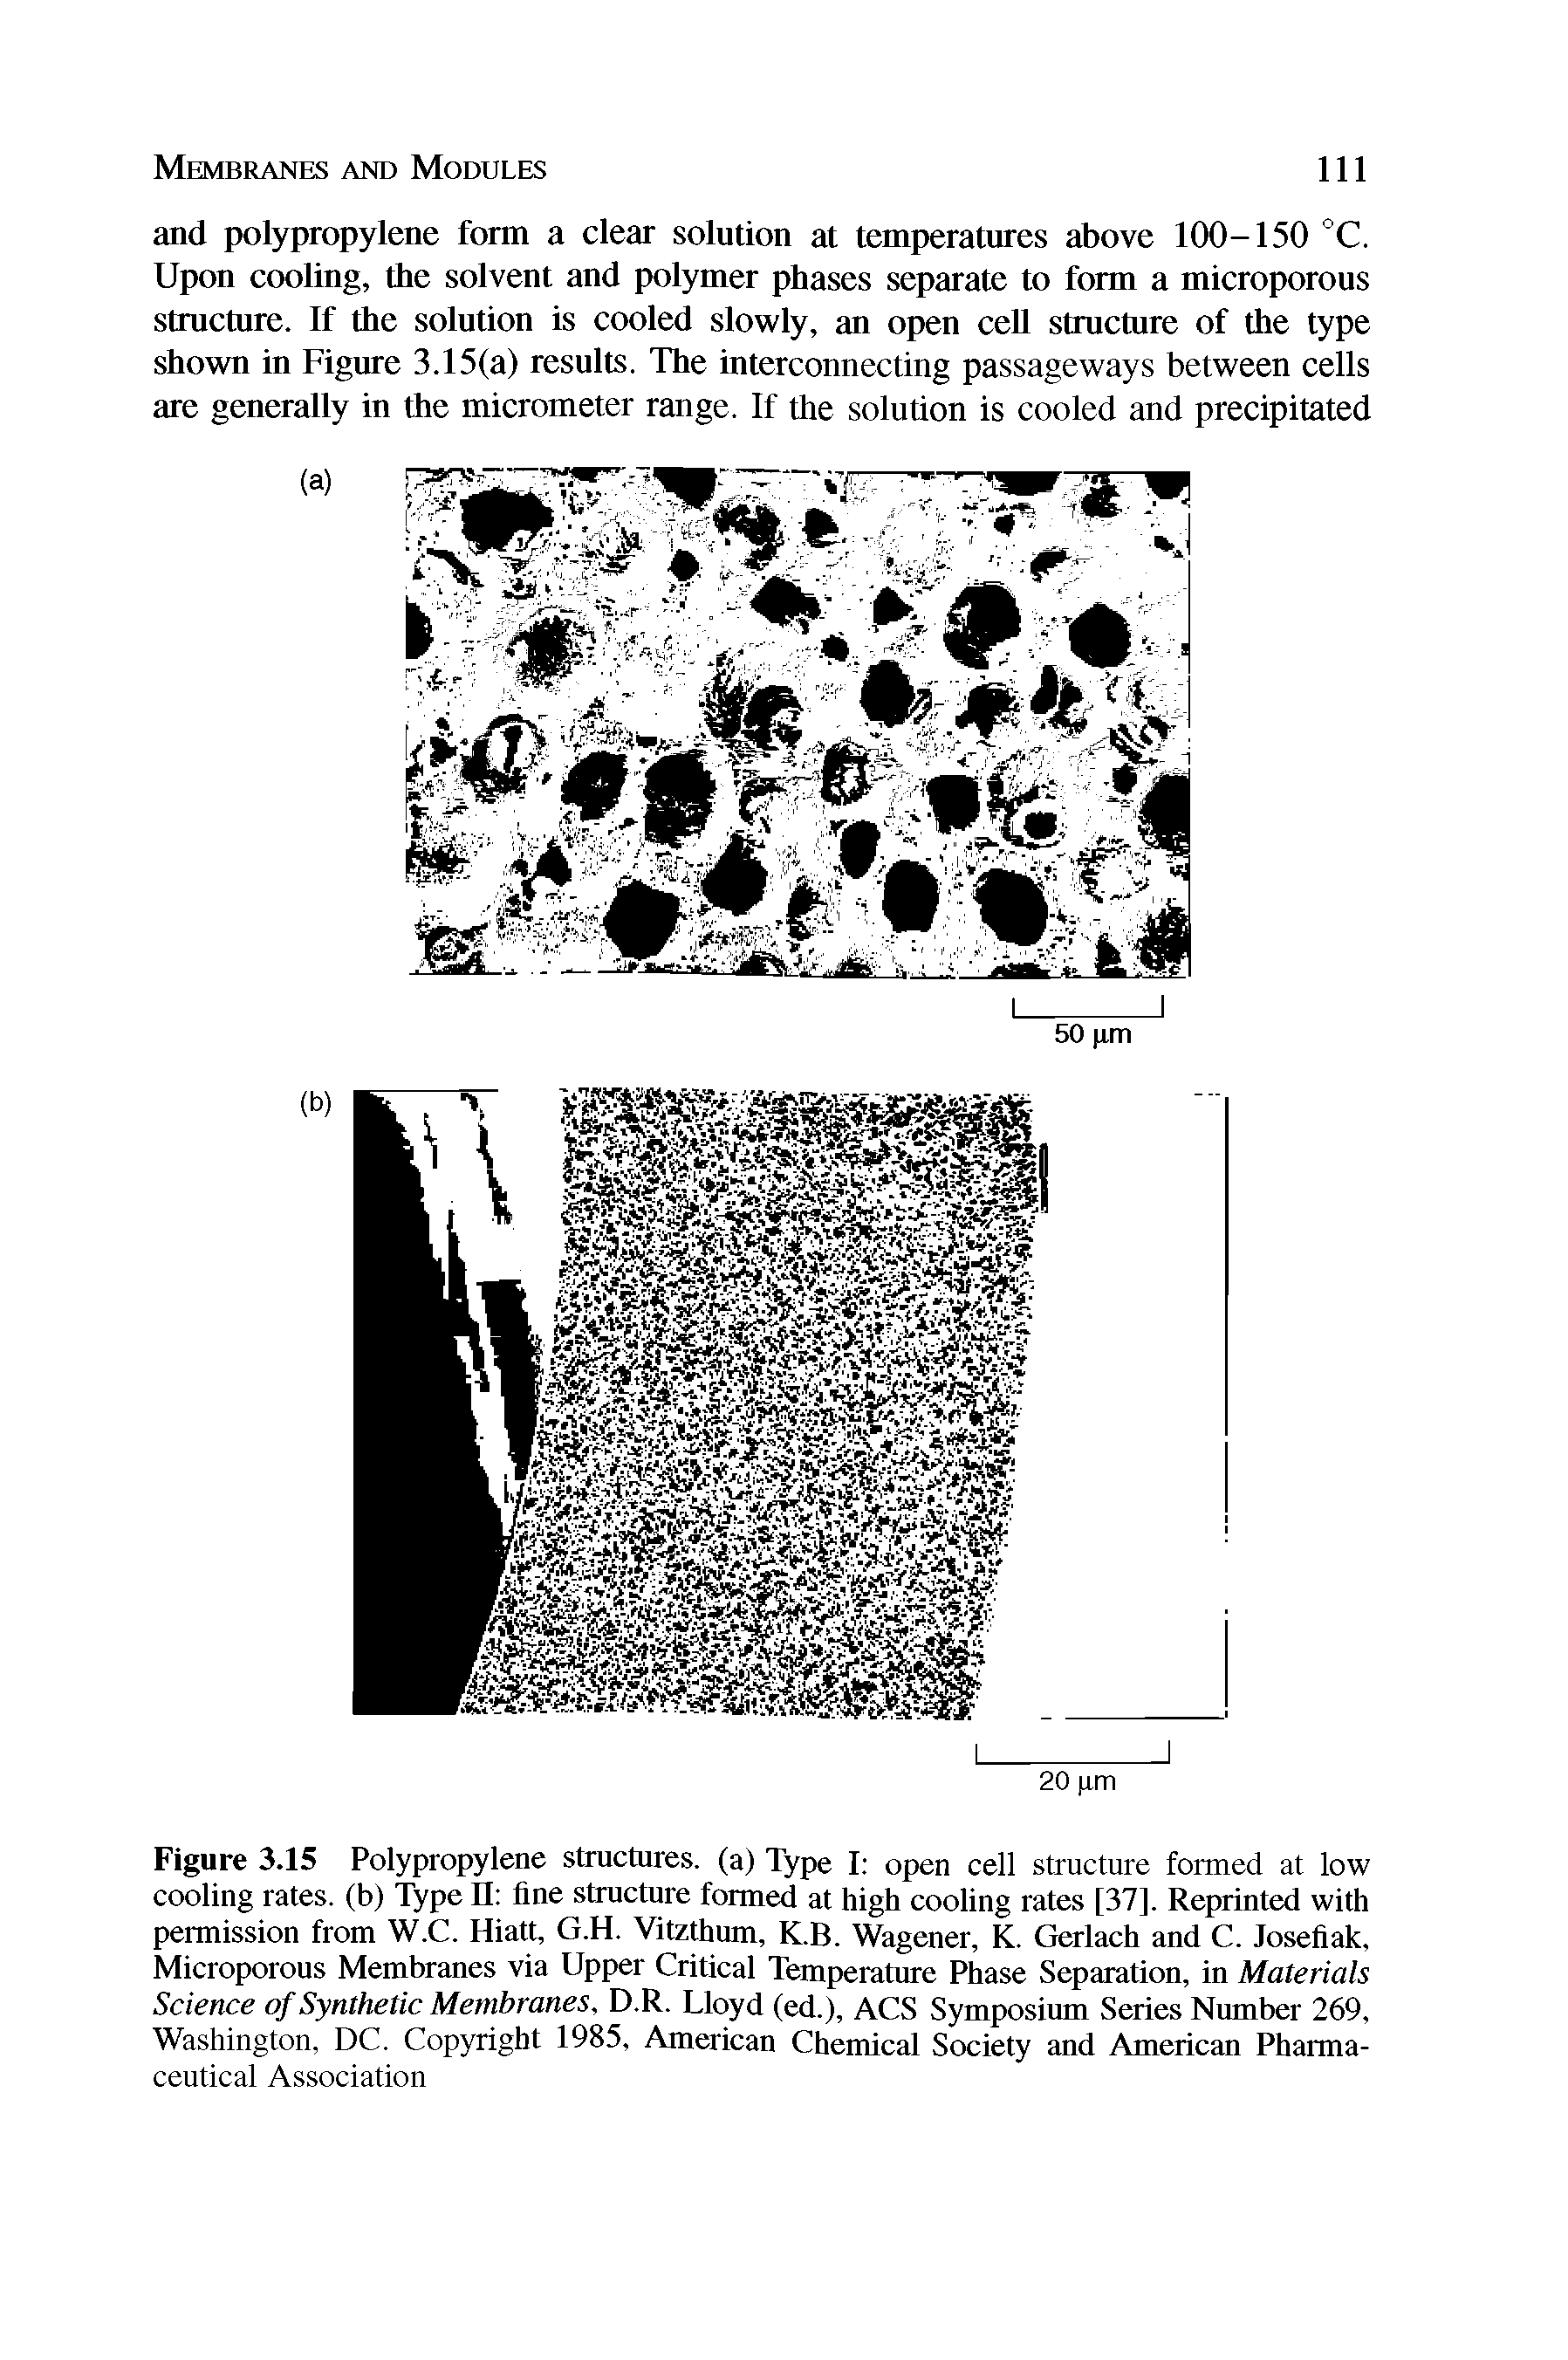 Figure 3.15 Polypropylene structures, (a) Type I open cell structure formed at low cooling rates, (b) Type II fine structure formed at high cooling rates [37]. Reprinted with permission from W.C. Hiatt, G.H. Vitzthum, K.B. Wagener, K. Gerlach and C. Josefiak, Microporous Membranes via Upper Critical Temperature Phase Separation, in Materials Science of Synthetic Membranes, D.R. Lloyd (ed.), ACS Symposium Series Number 269, Washington, DC. Copyright 1985, American Chemical Society and American Pharmaceutical Association...